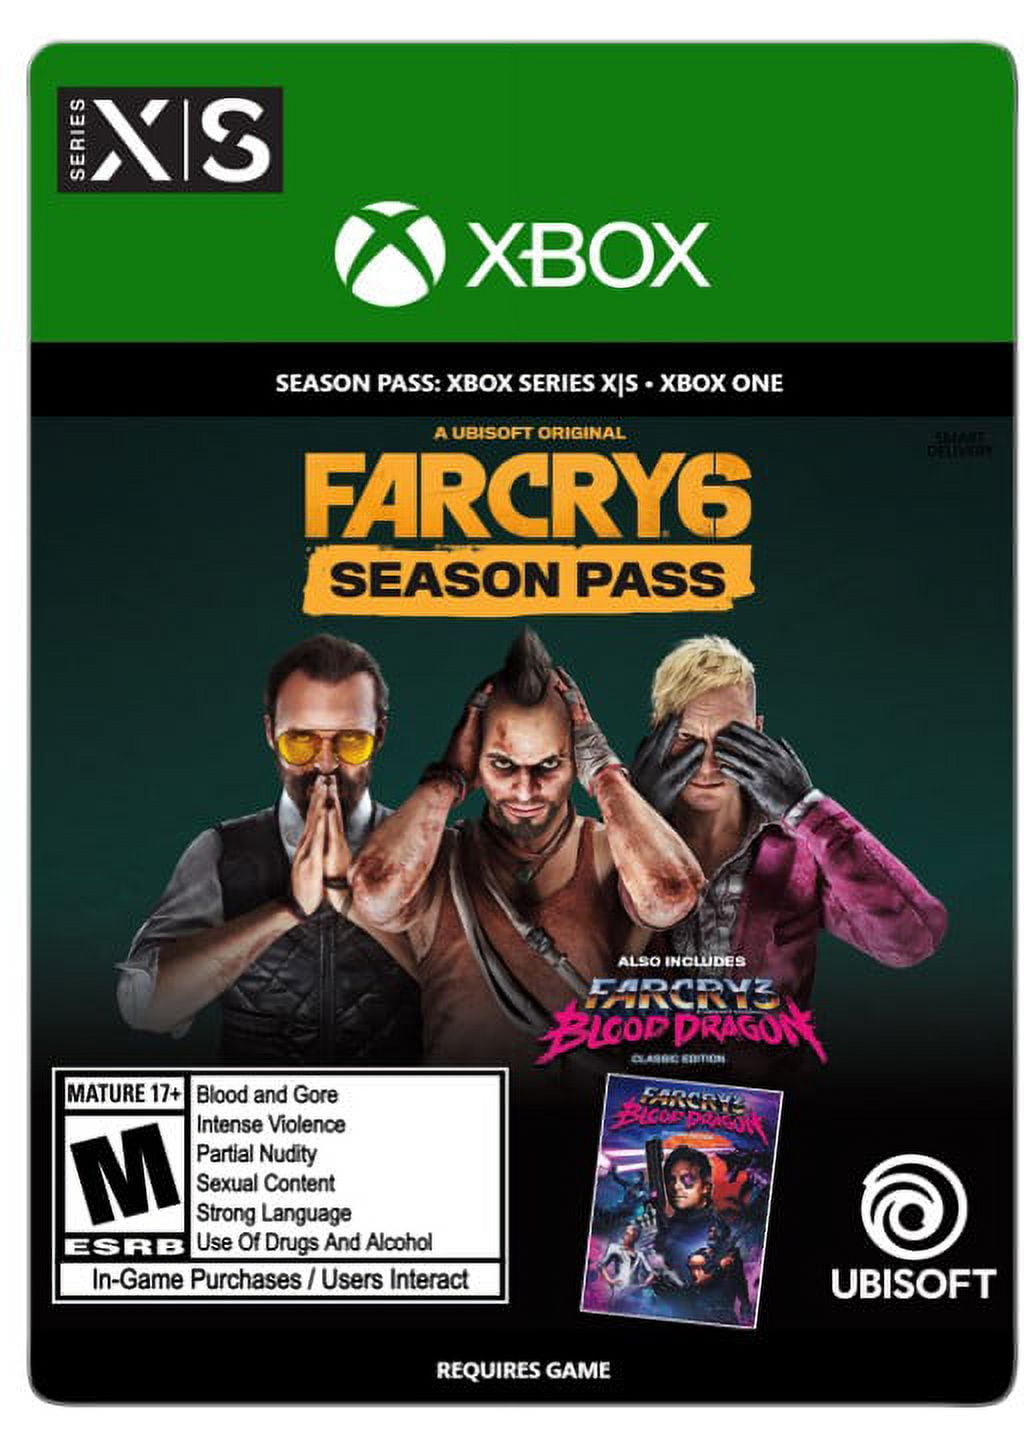 Ubisoft on X: Get up to 50% off Far Cry 6! Play free Mar 24-27. Plus, you  could win an Xbox Series S! To enter the sweepstakes, like & share this  video